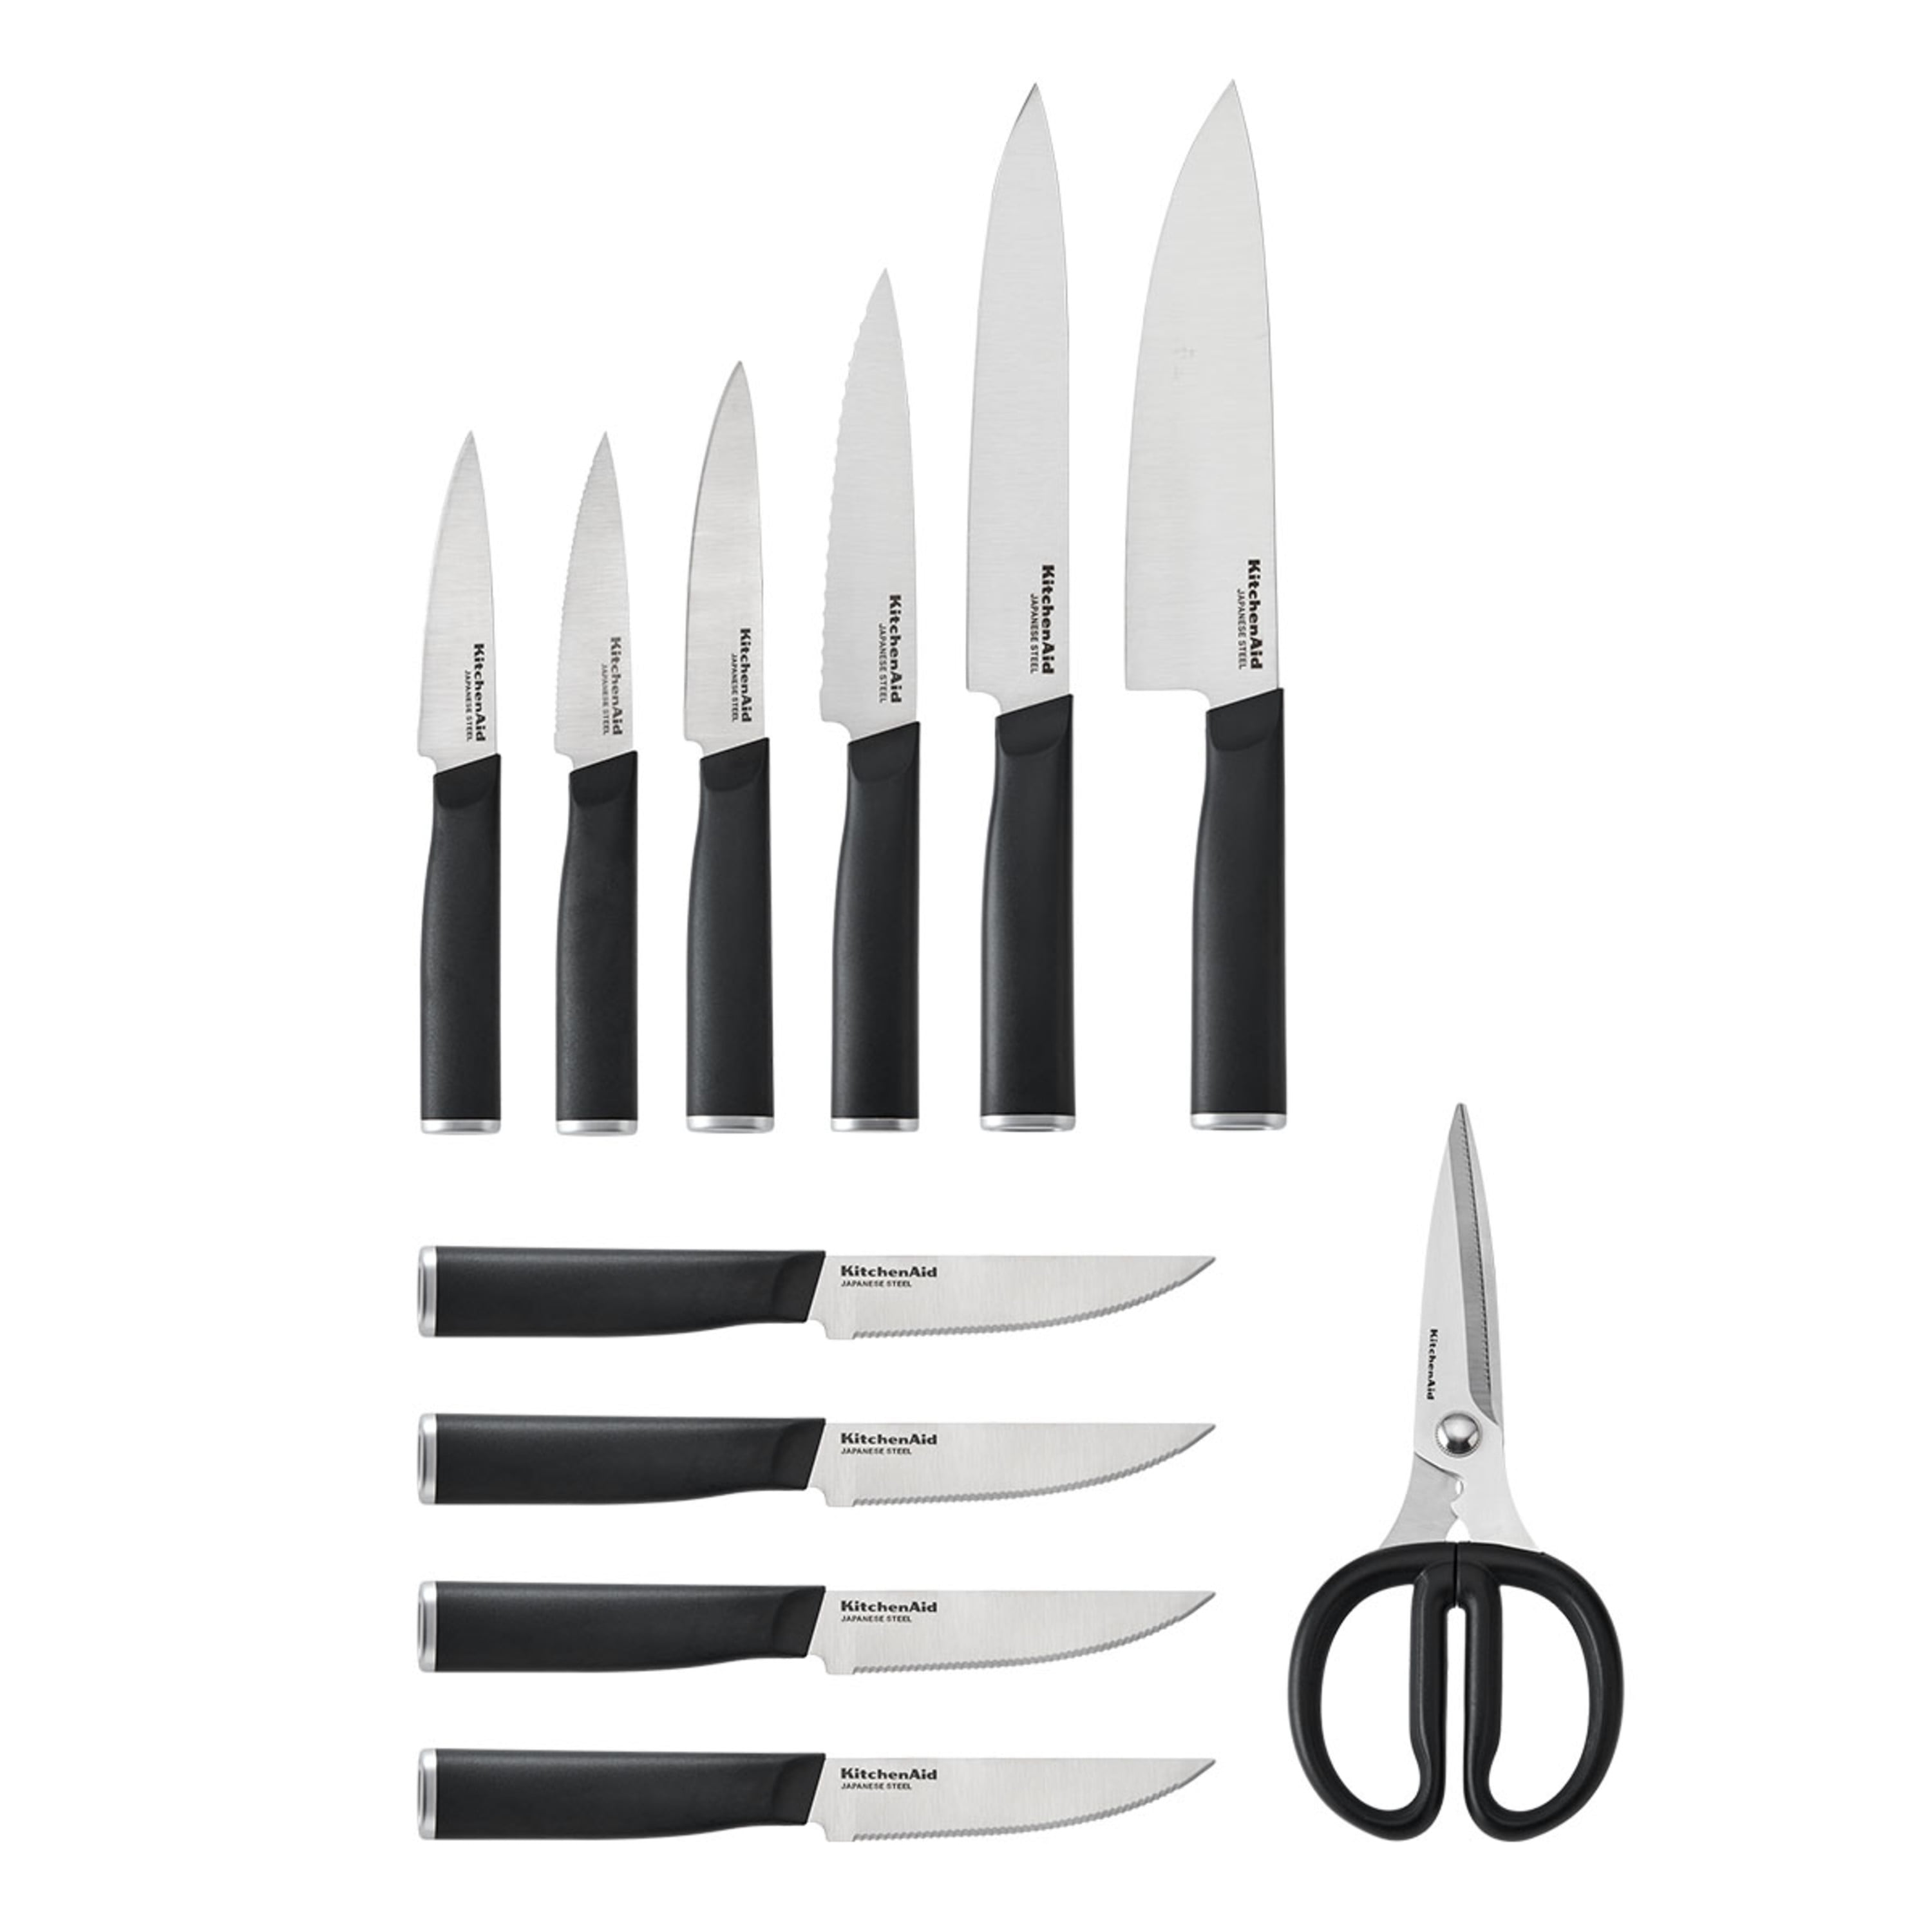 KitchenAid Classic 12 Piece Knife Block Set with Built in Knife Sharpener,  High Carbon Japanese Stainless Steel Kitchen Knives, Sharp Kitchen Knife